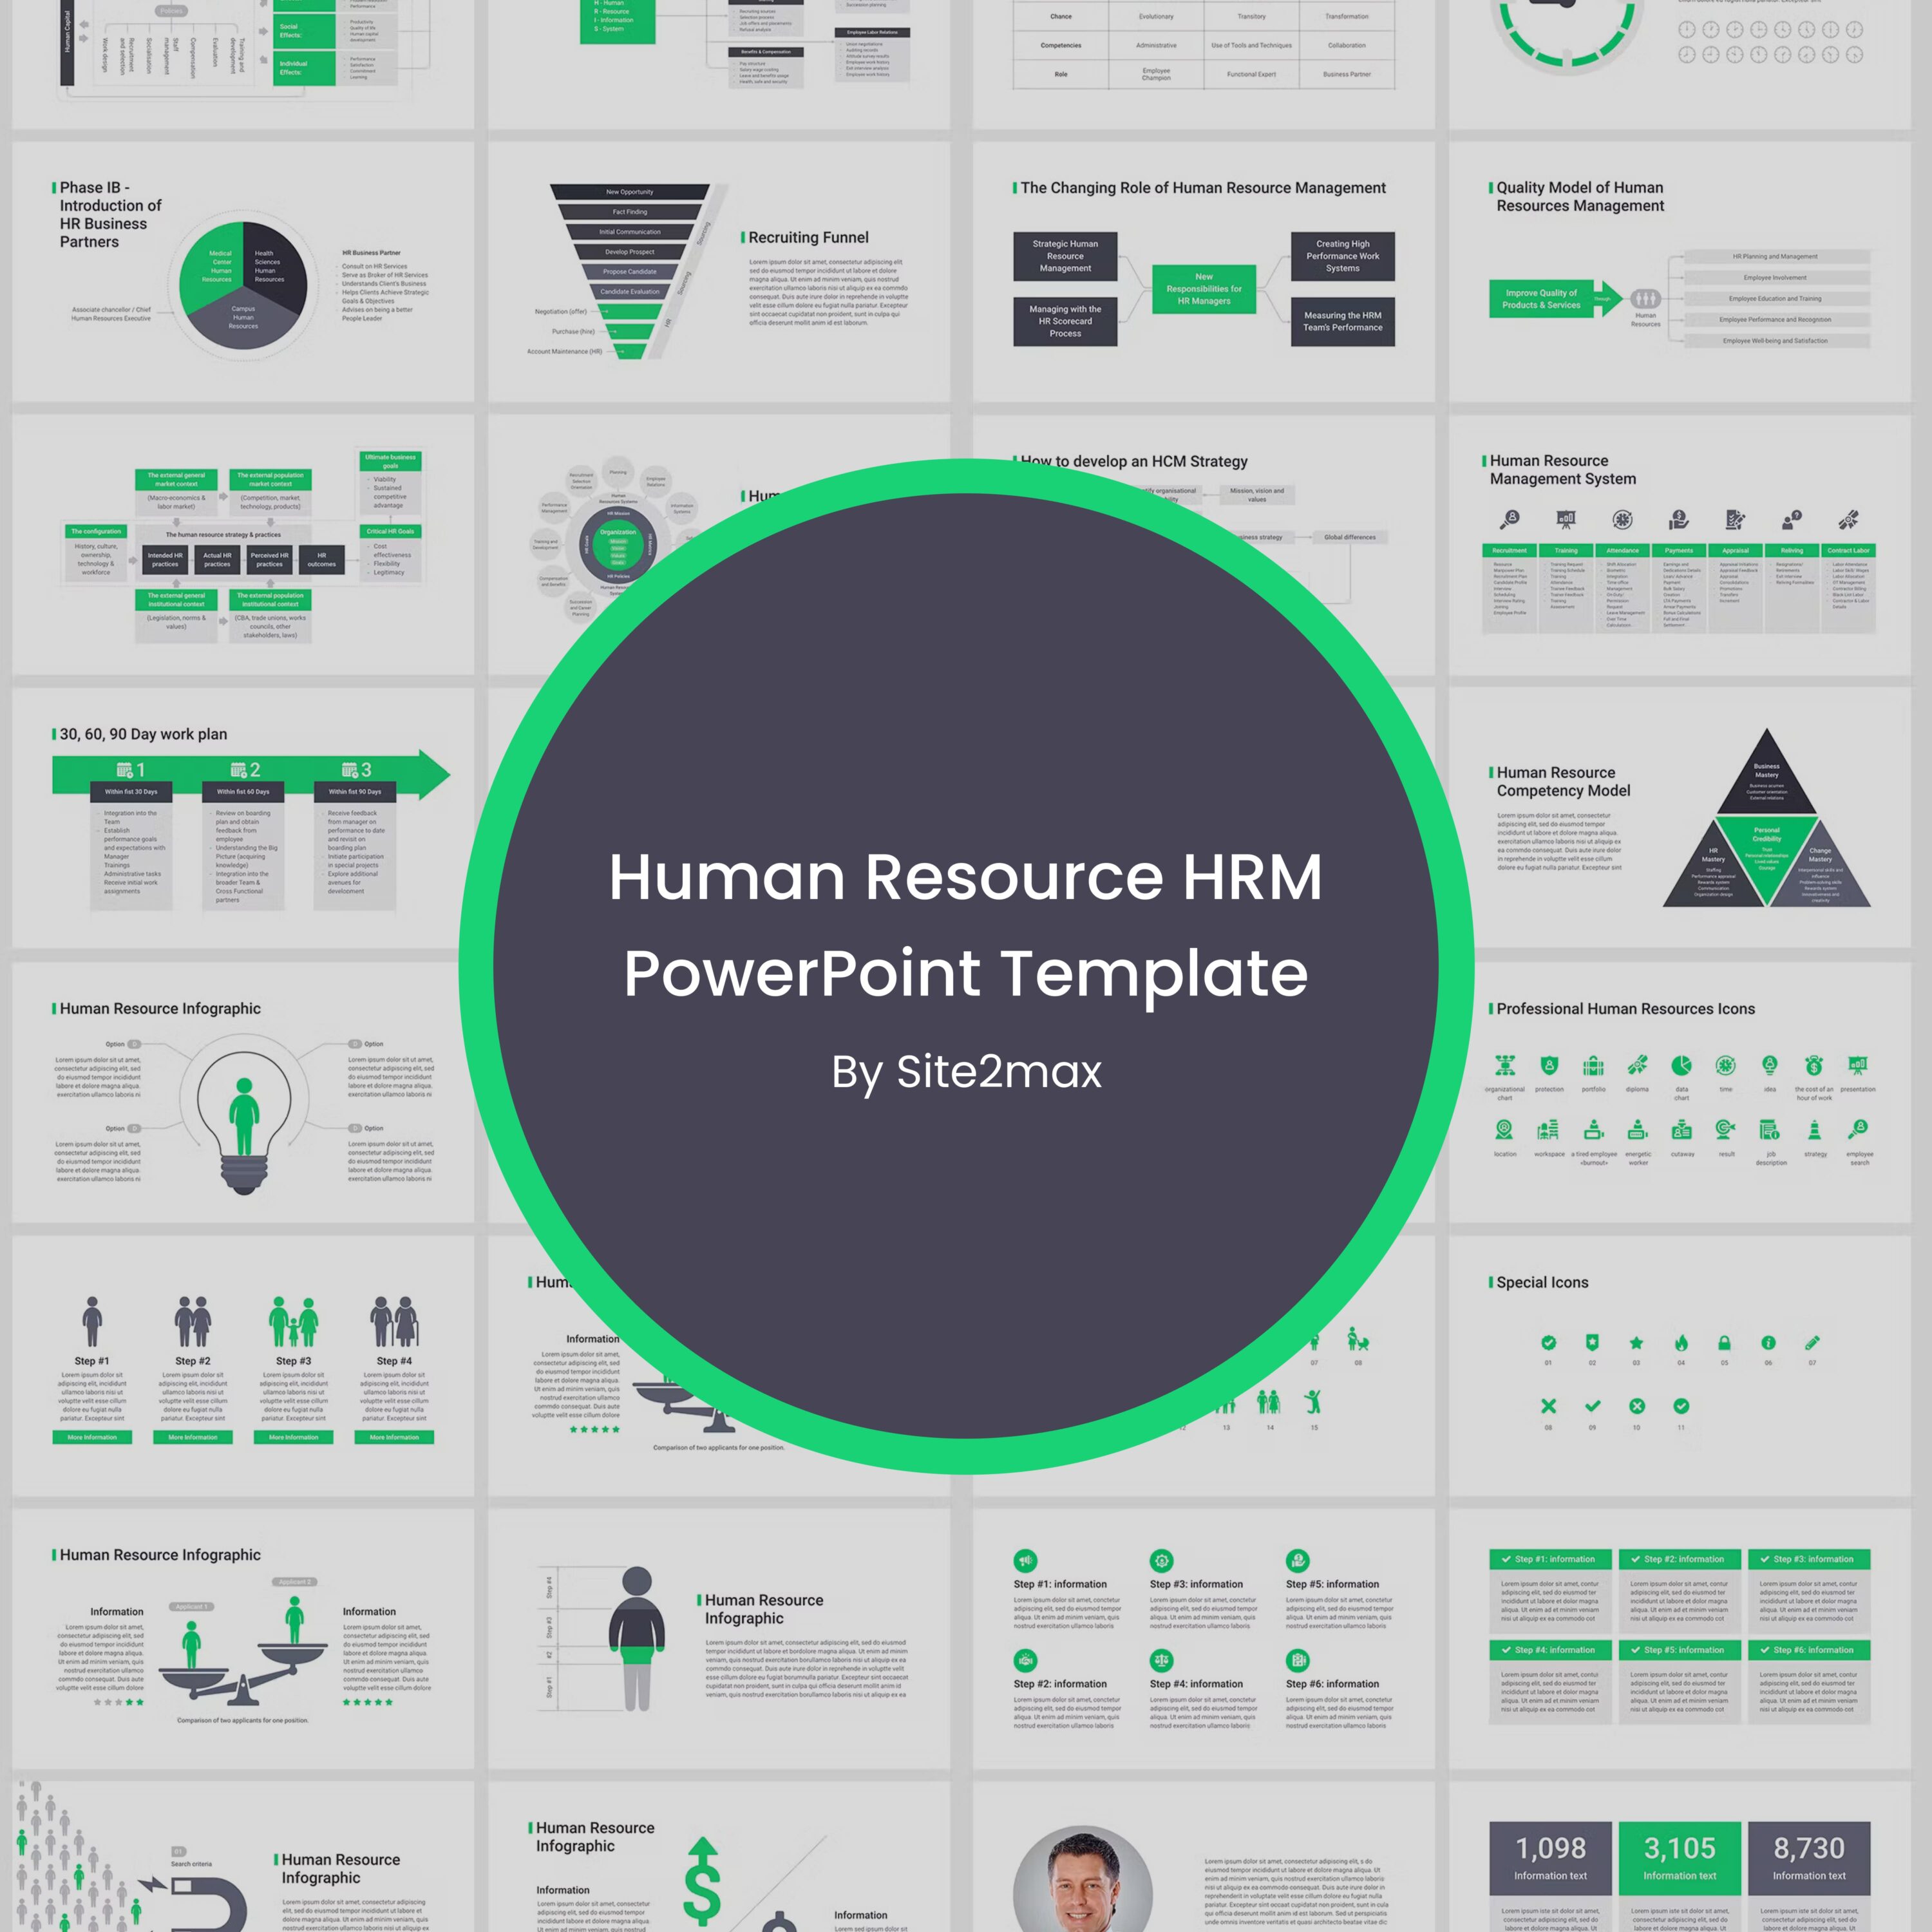 Human Resource HRM Powerpoint Template Preview 1500 2.